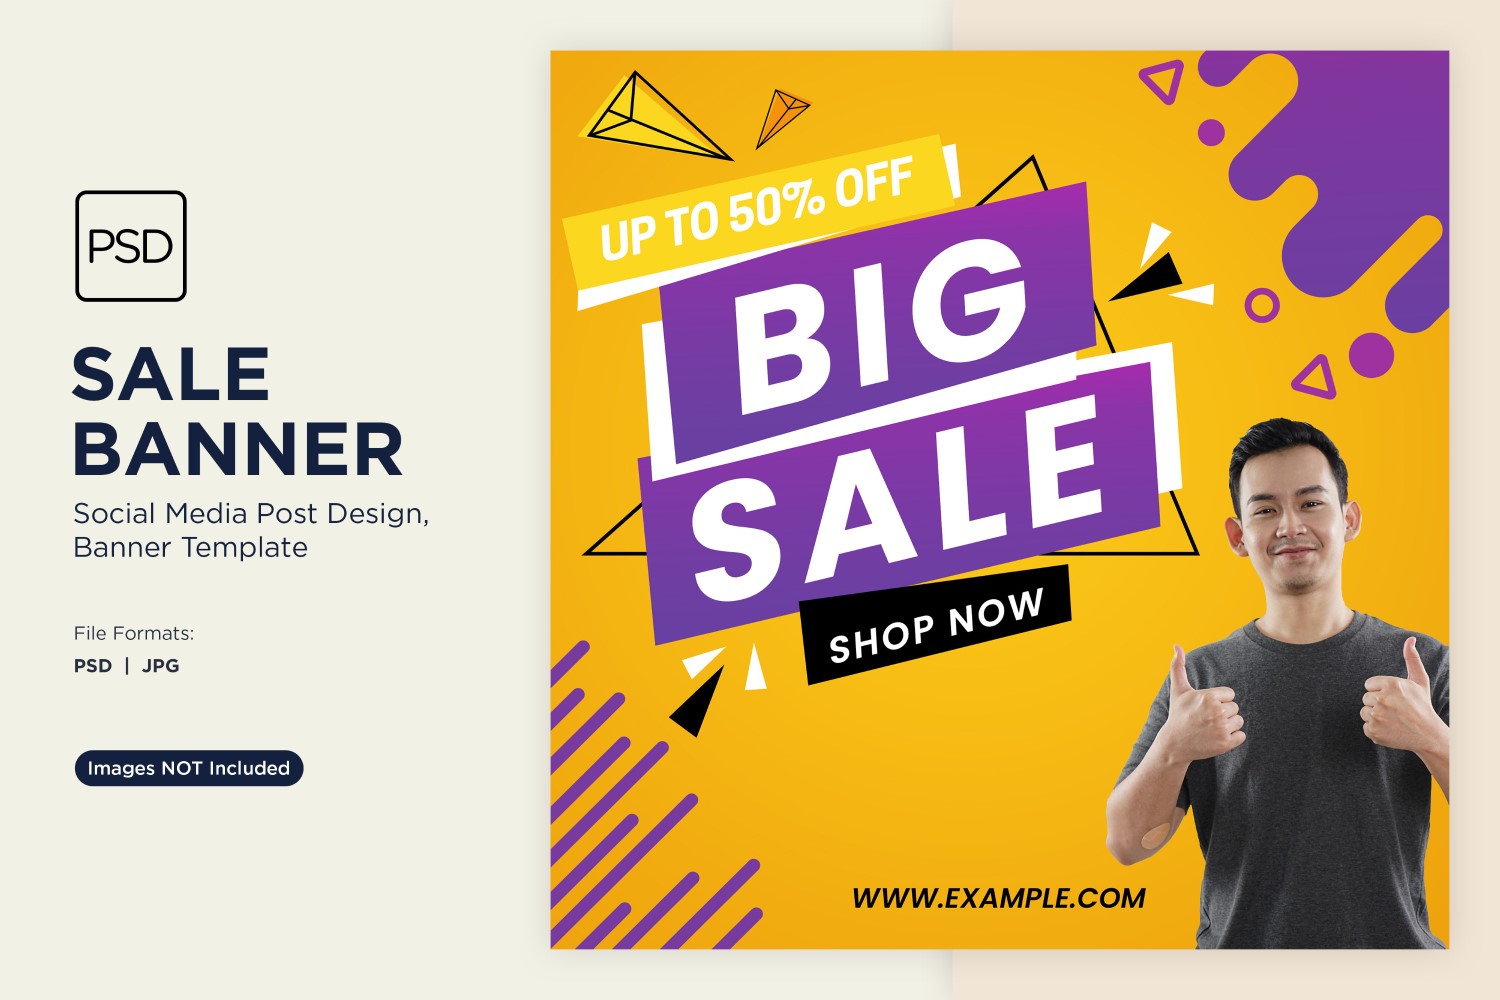 Big Sale on Store And Online Sale Banner Design Template